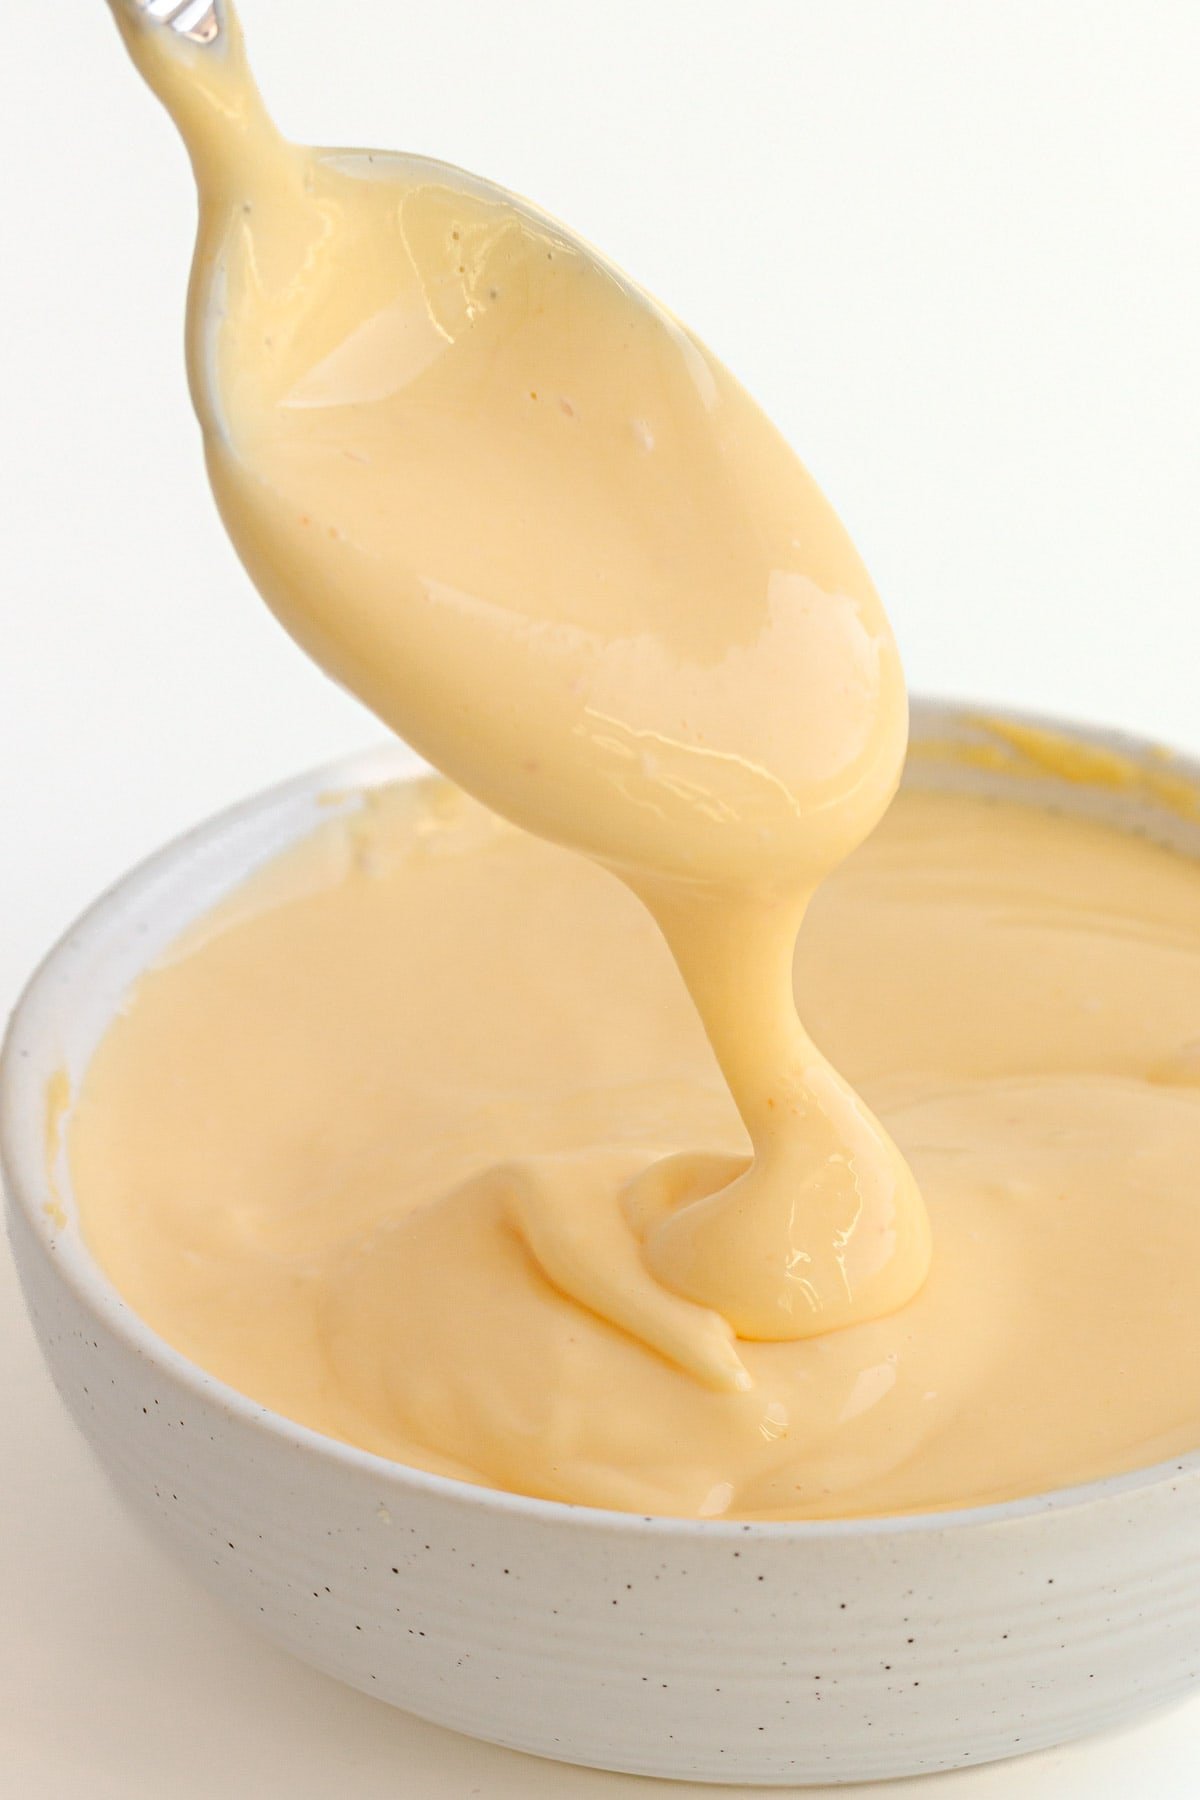 Spoonful of hollandaise sauce drizzling into the bowl beneath it.